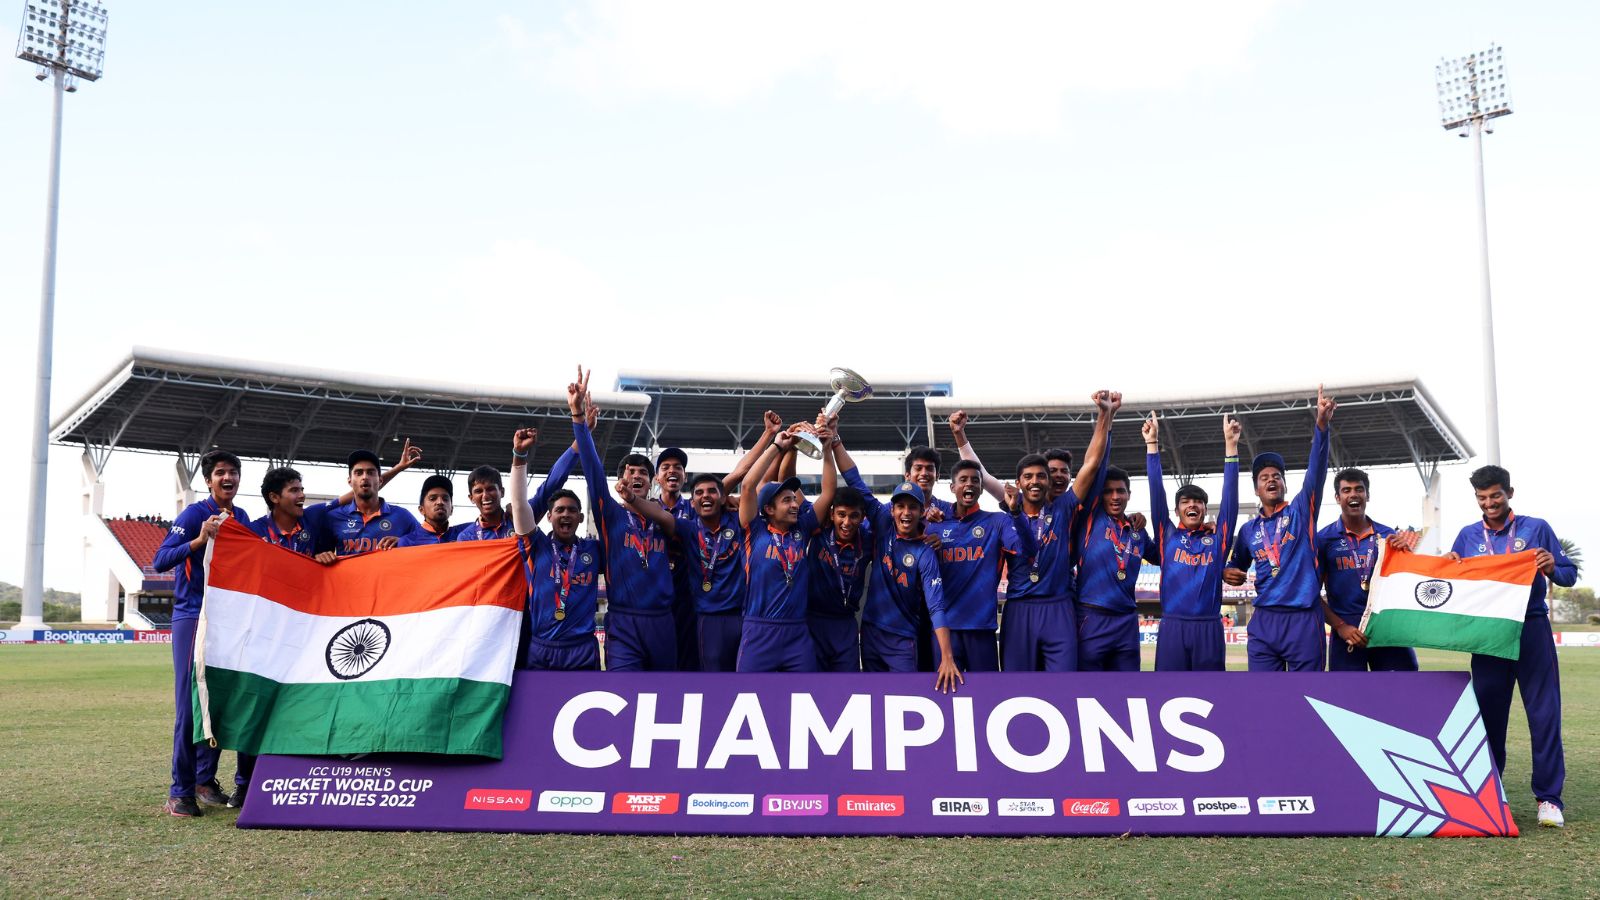 Focus on the future stars: In the new year, a new format for ICC Under-19 World Cup